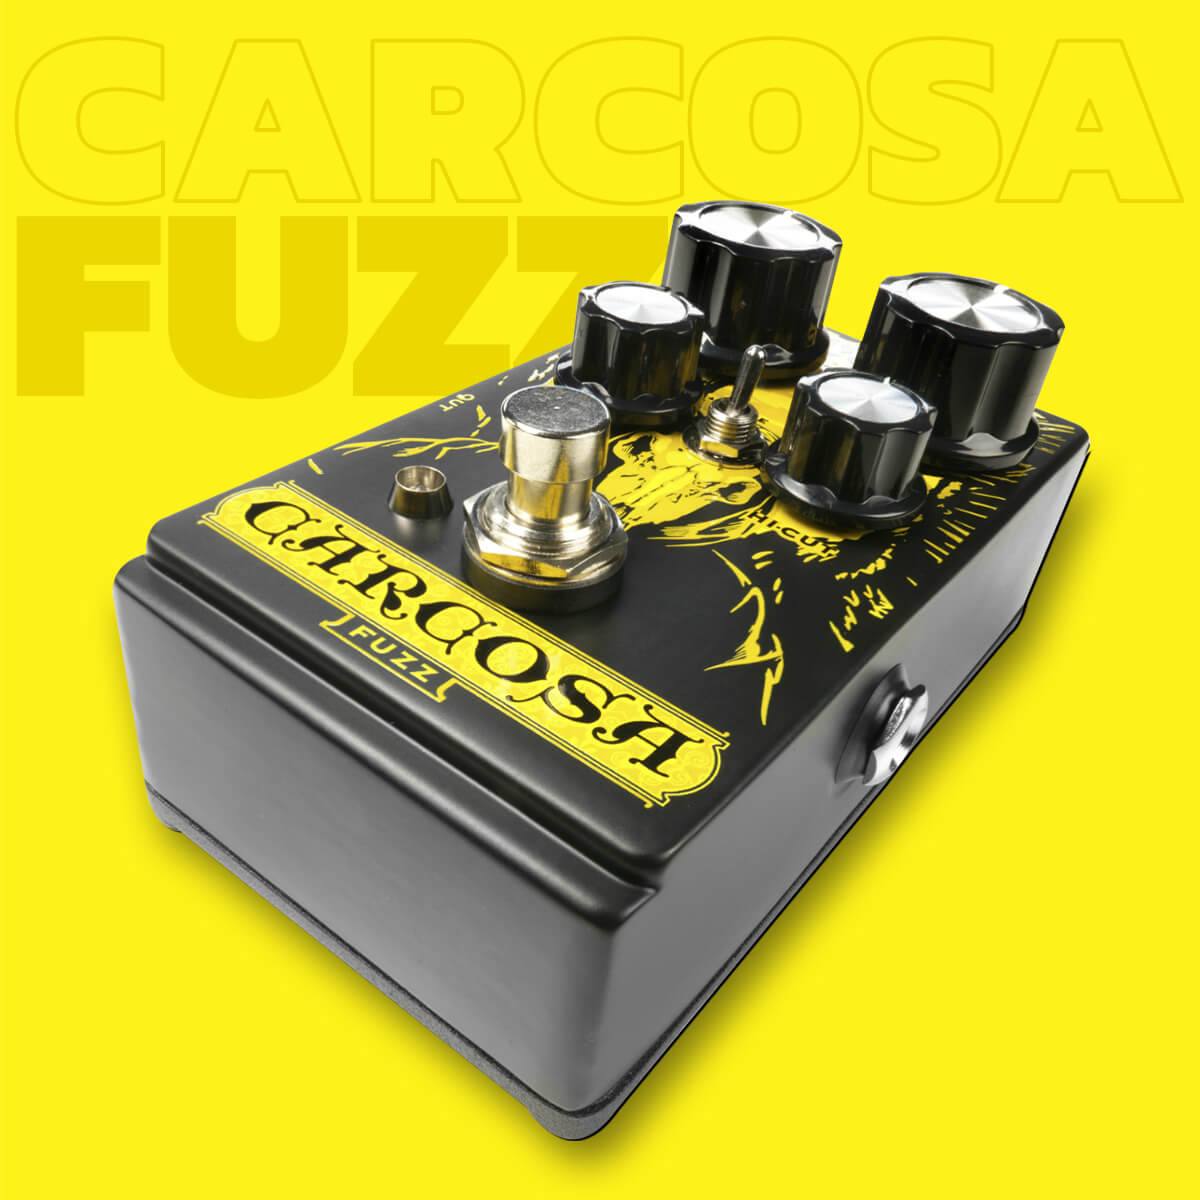 DOD Carcosa Fuzz analog fuzz guitar pedal in black with yellow graphics, yellow background that says 